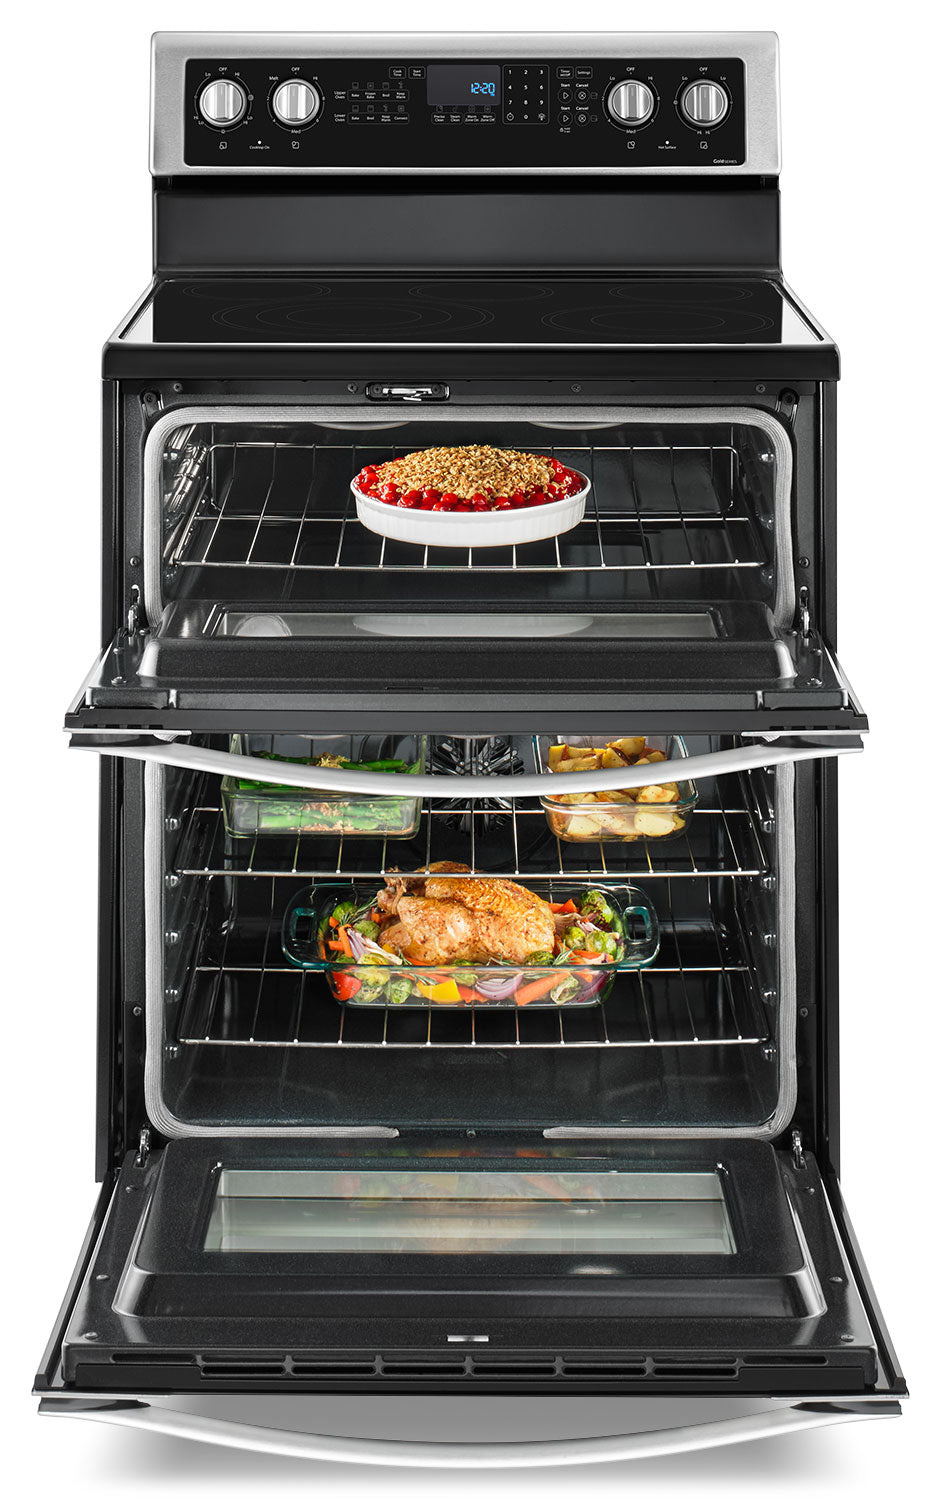 Whirlpool Stainless Steel Electric Double Range (6.7 Cu. Ft.) - YWGE745C0FS